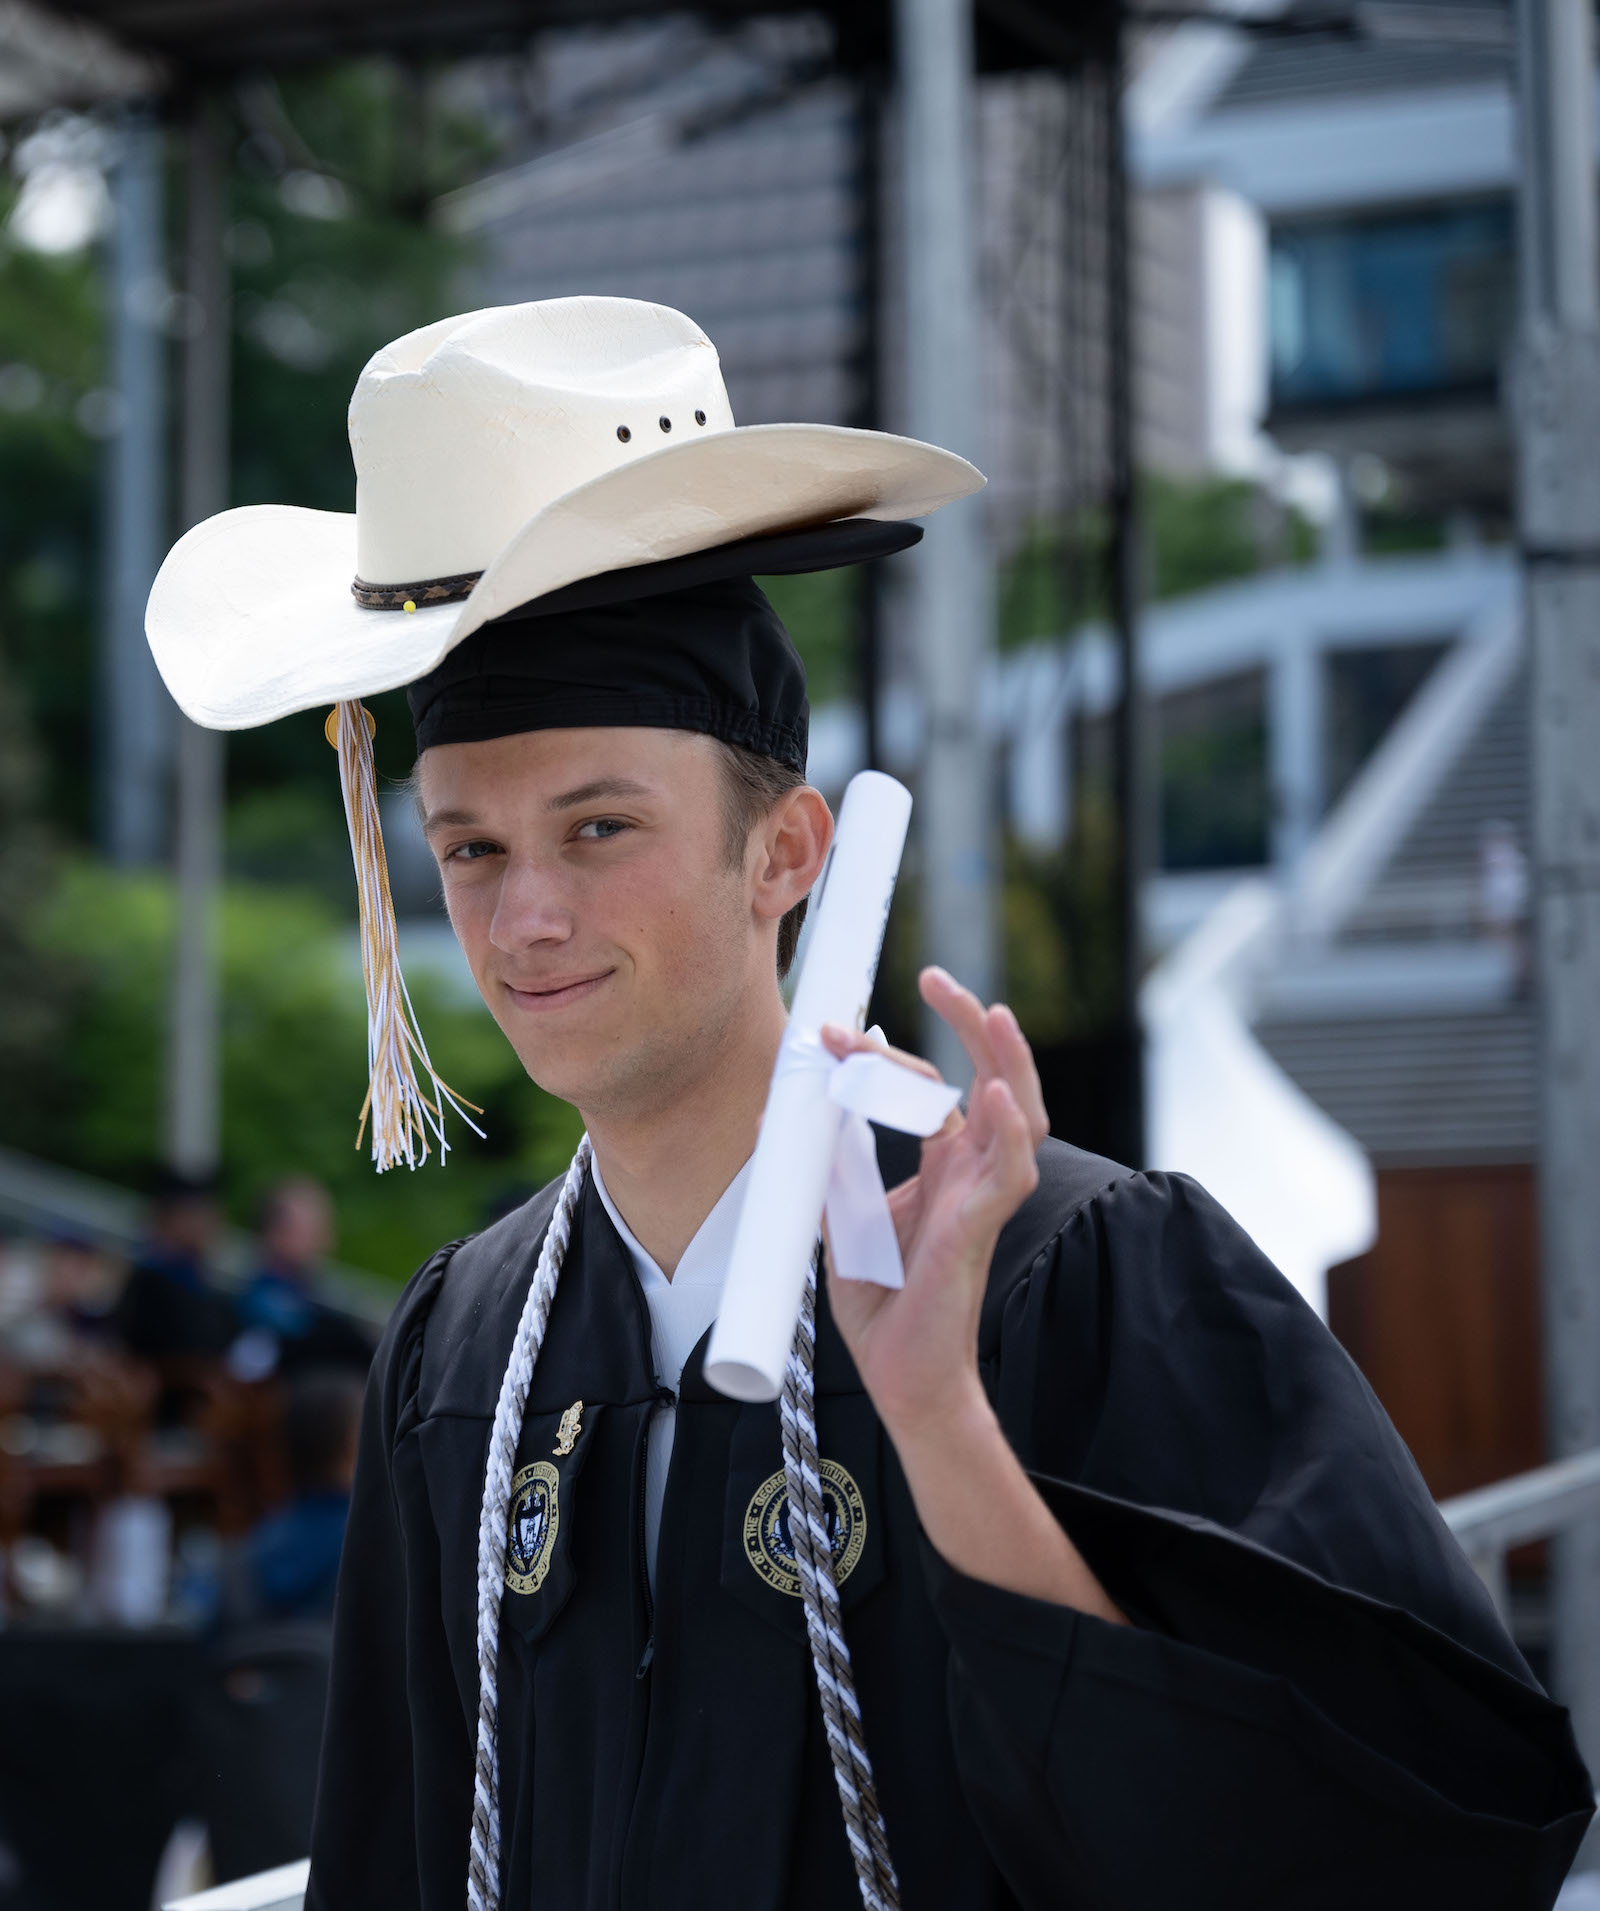 bachelor's ceremony, male wearing cowboy hat over mortar board